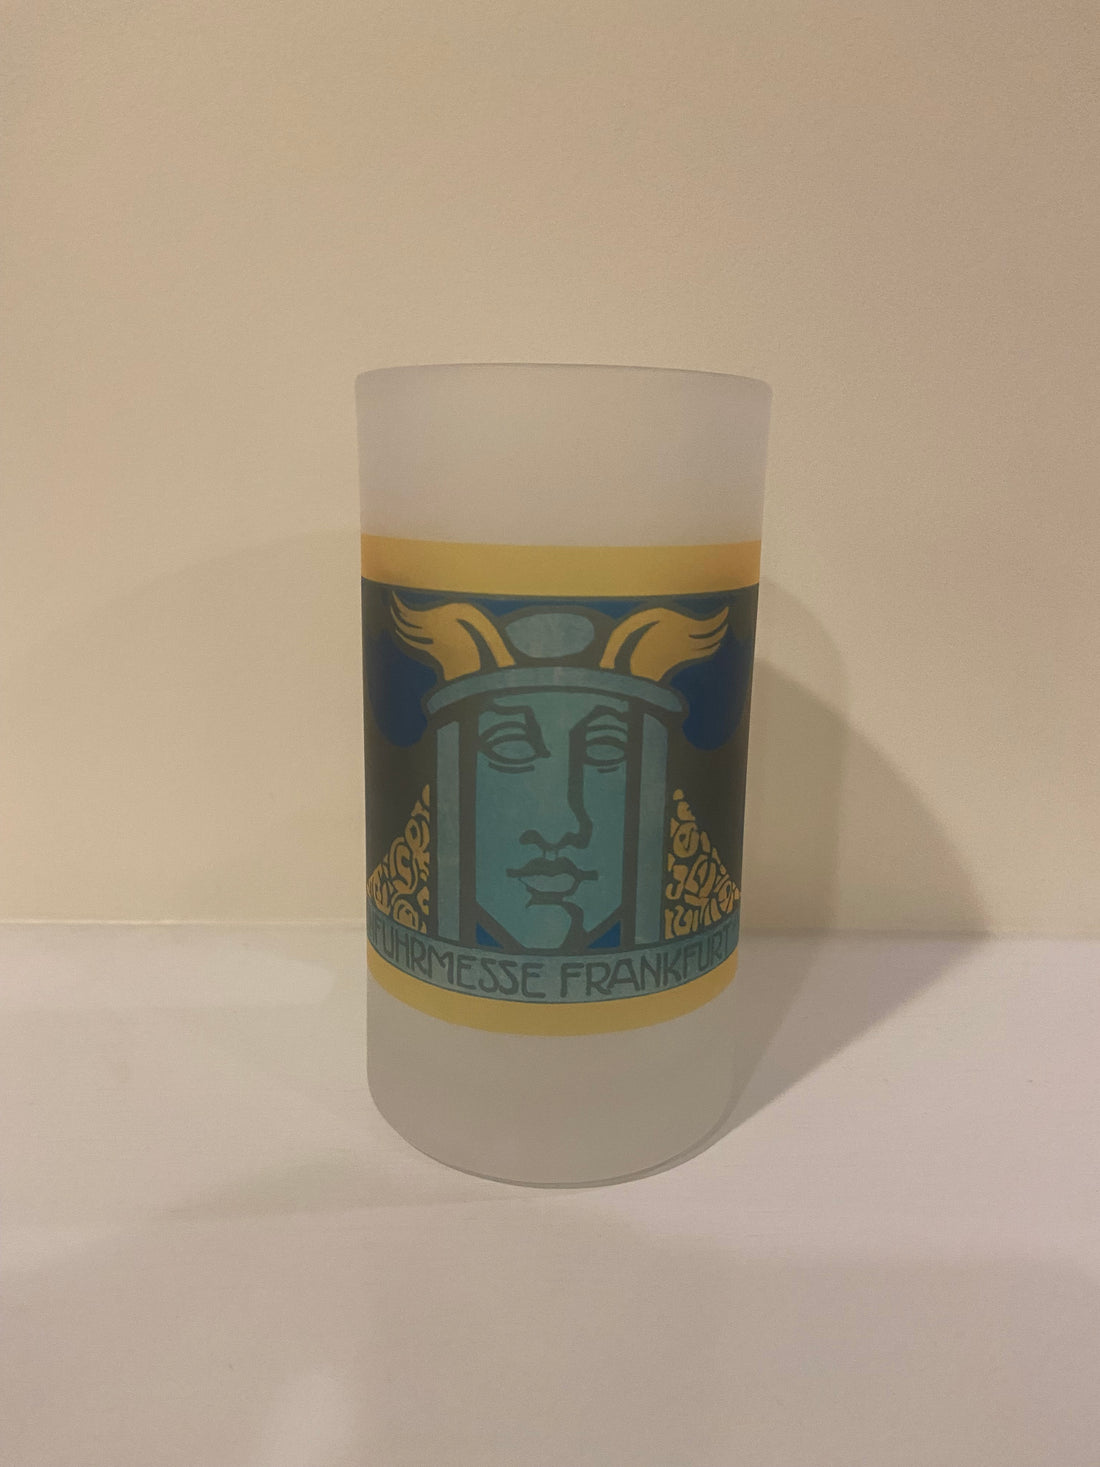 Winged Face of Teutonic Character on Frosted Glass Beer Mug